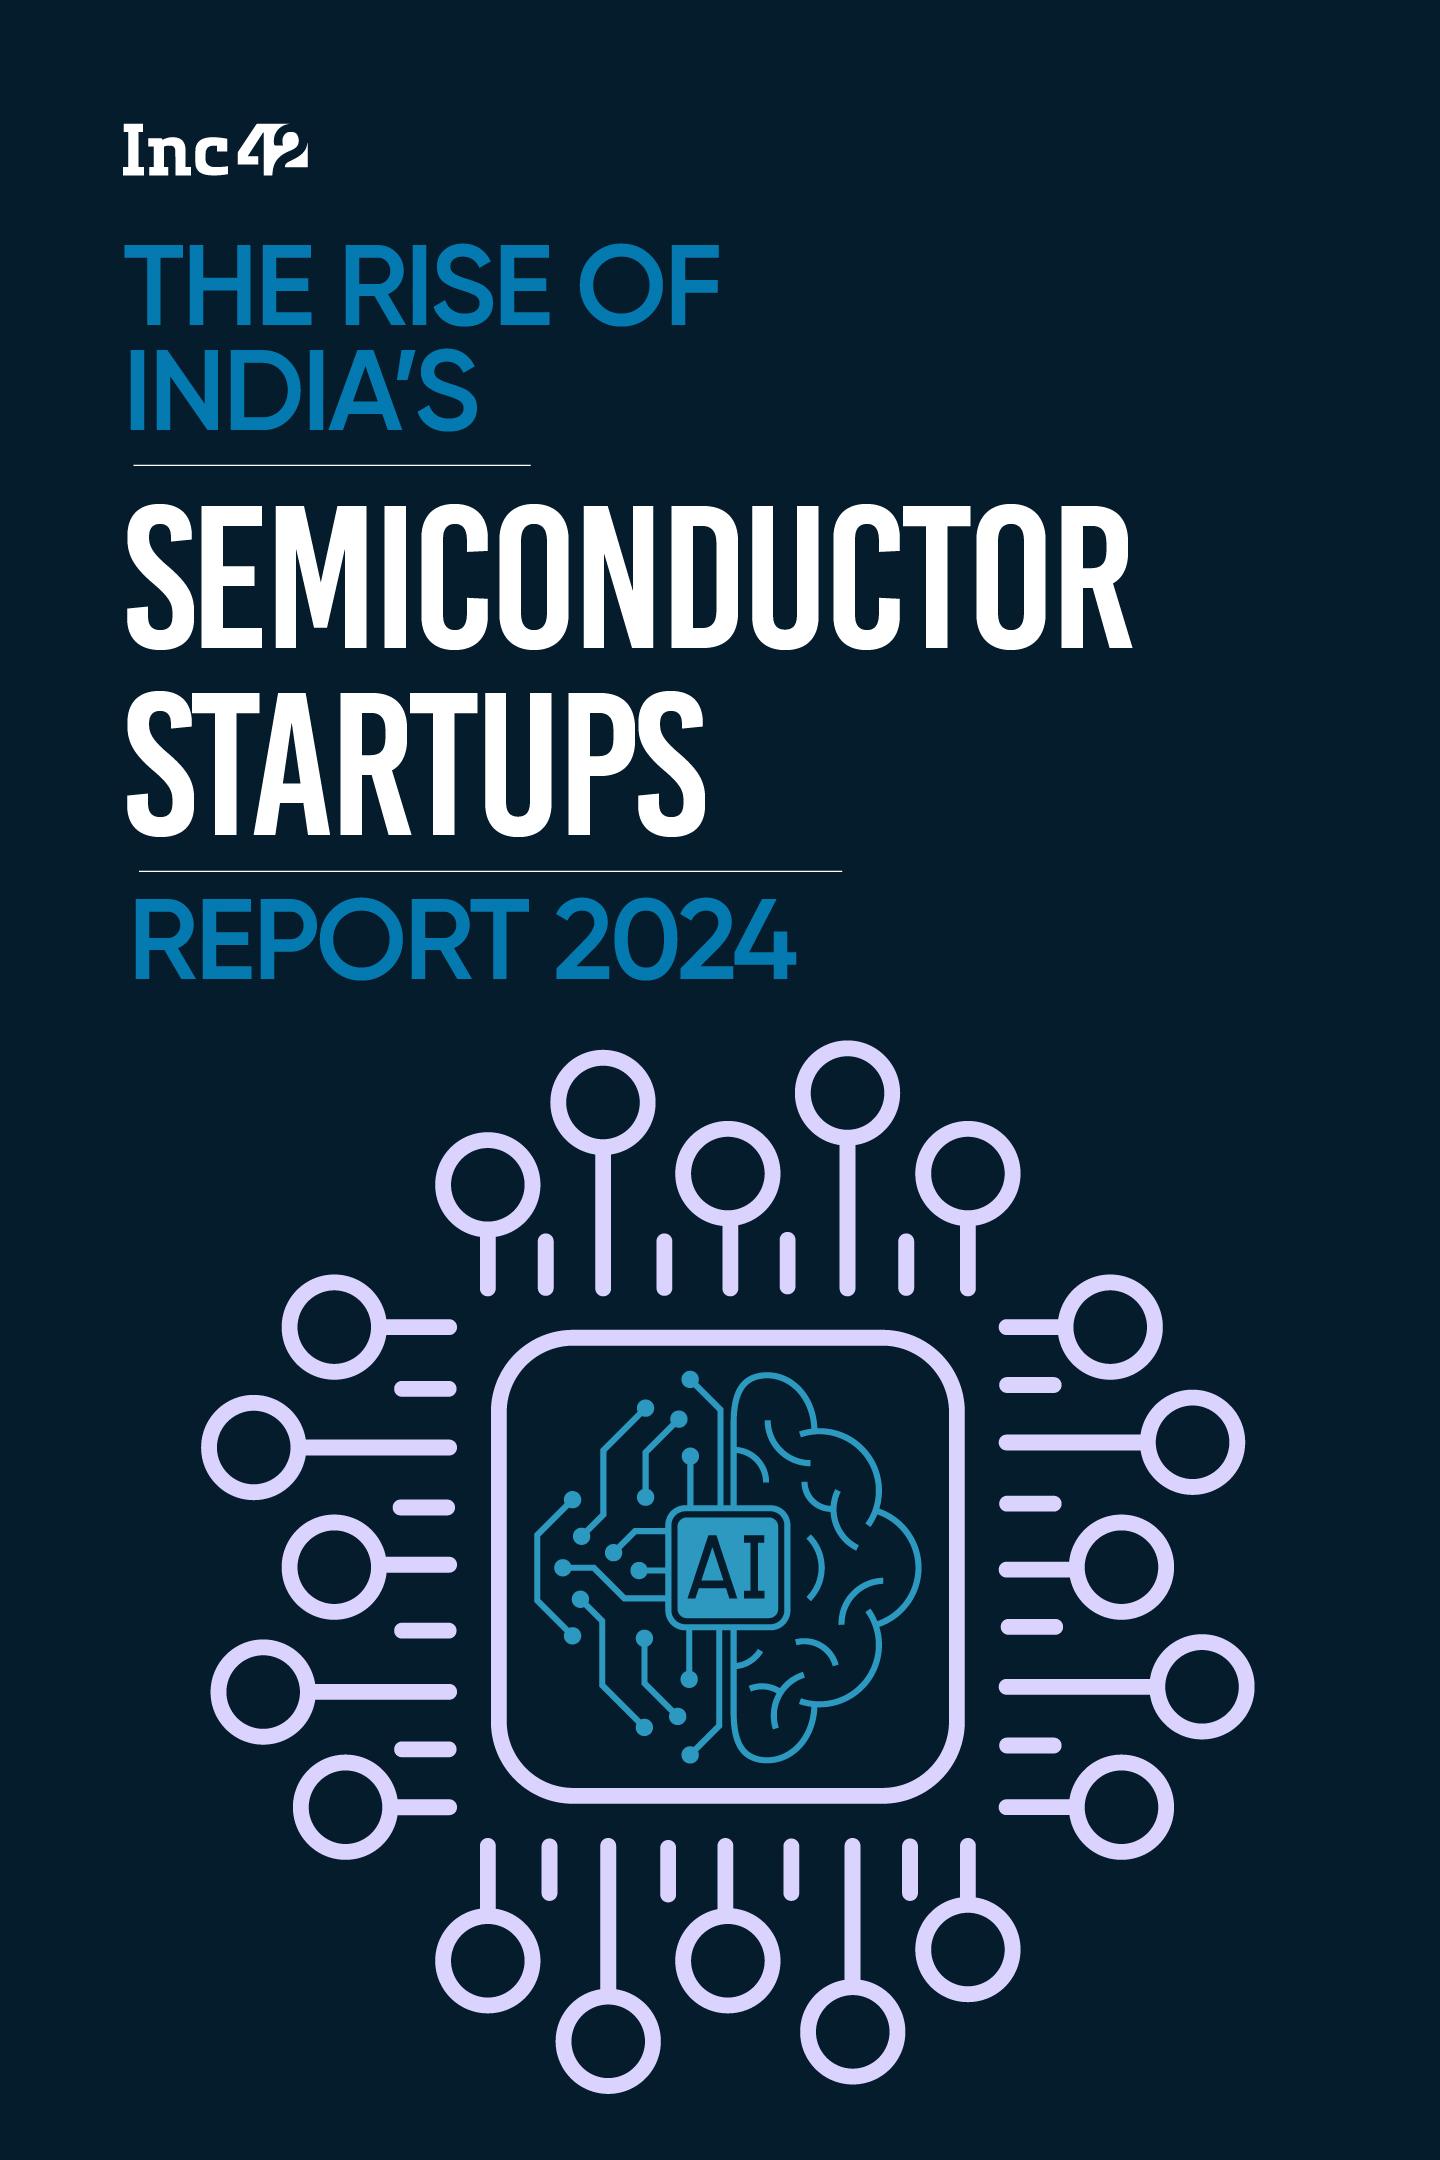 The Rise Of India’s Semiconductor Startups Report 2024